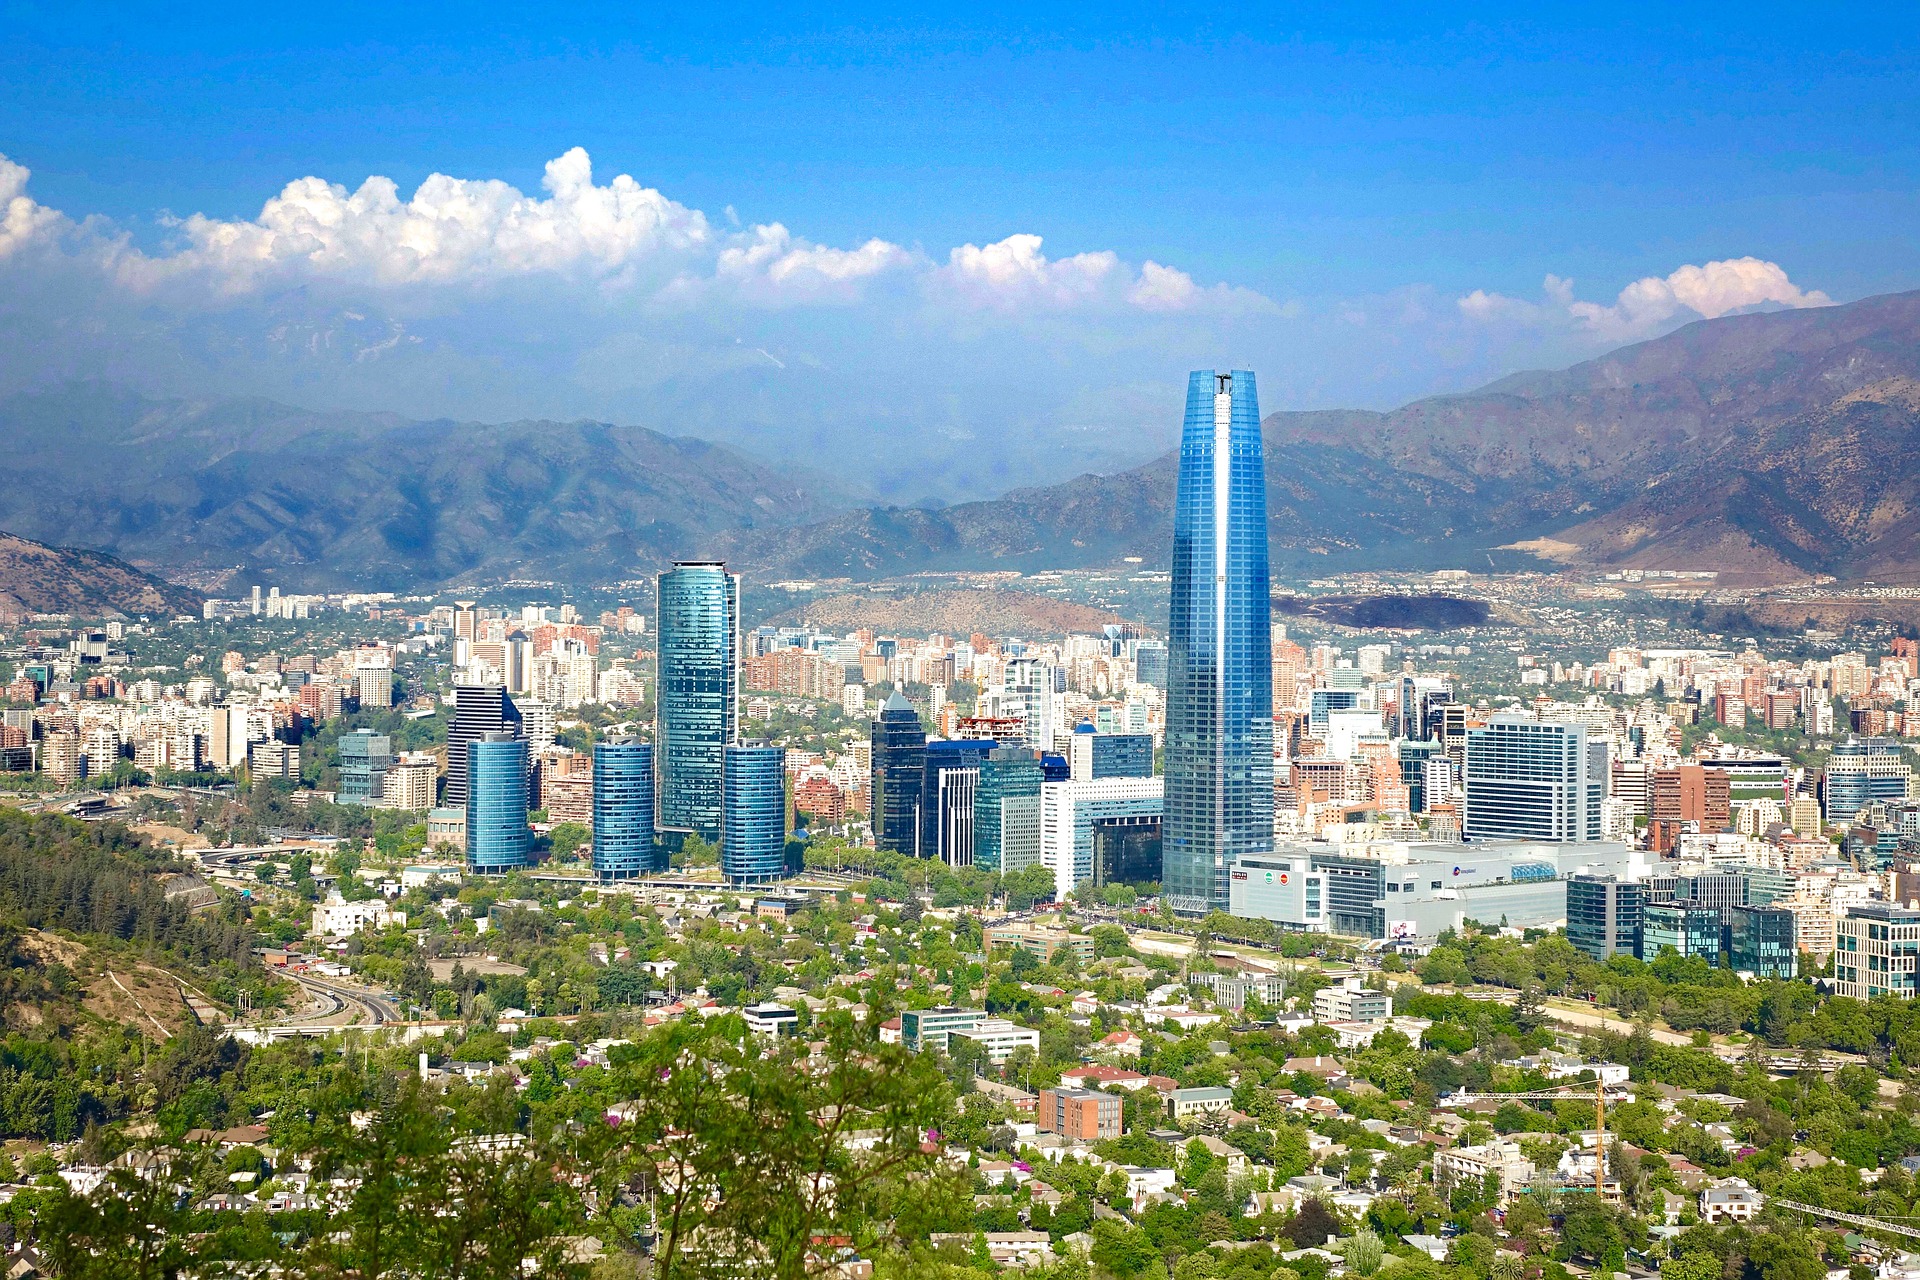 InvestChile Launches E-Book on the Green Energy Boom in the South American Country